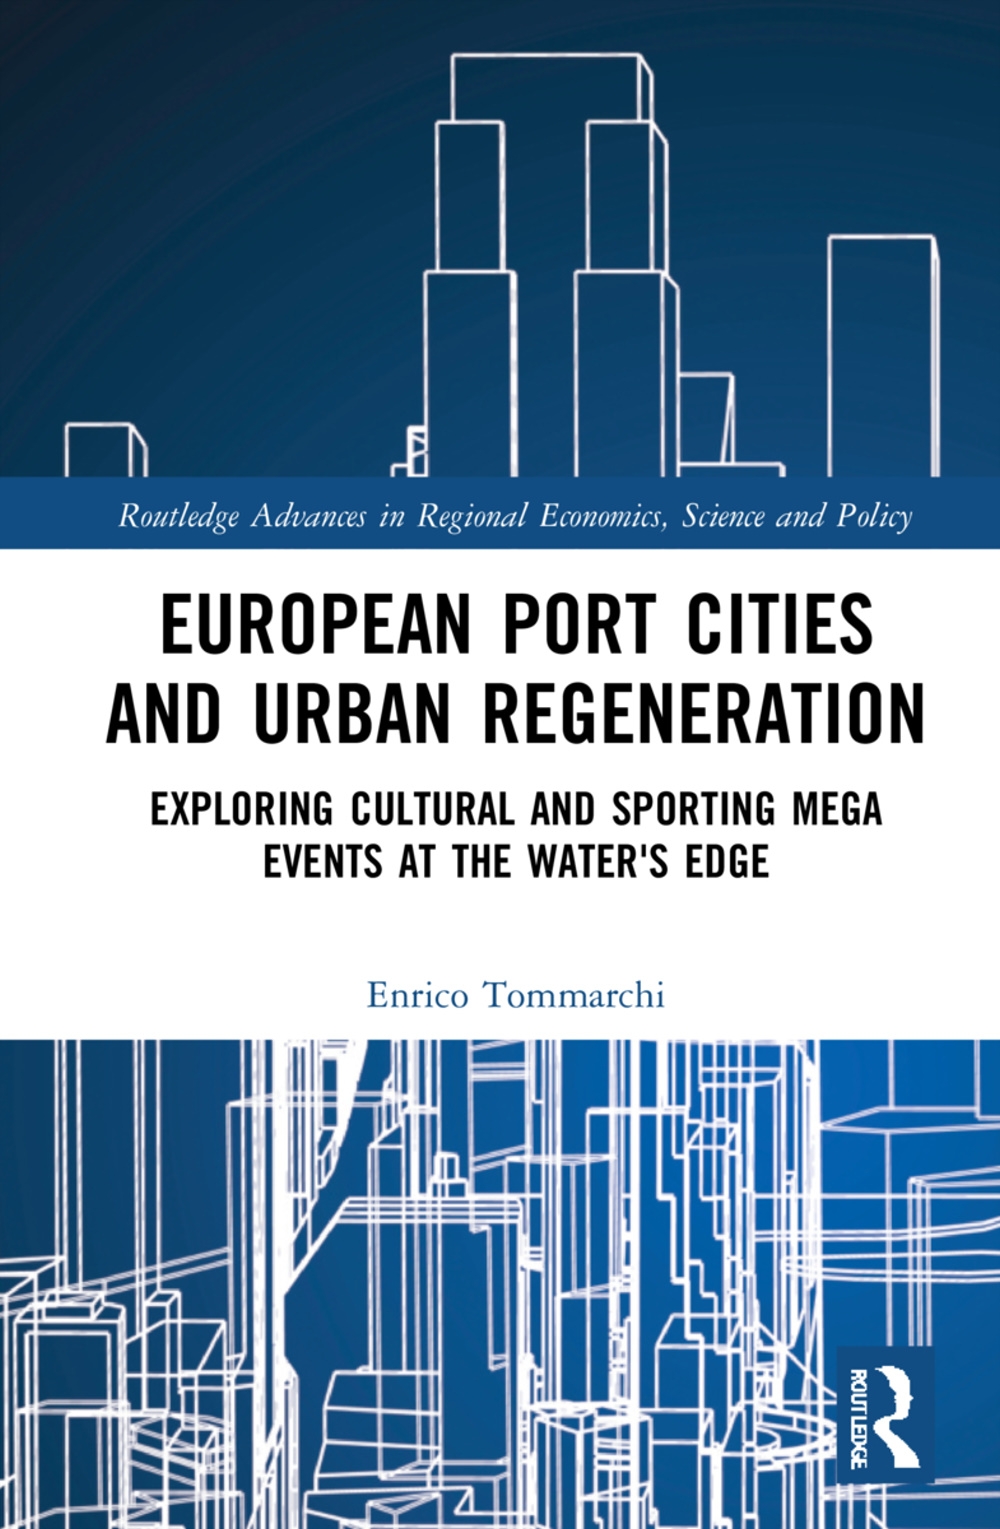 European Port Cities and Urban Regeneration: Exploring Cultural and Sporting Mega Events at the Water’s Edge